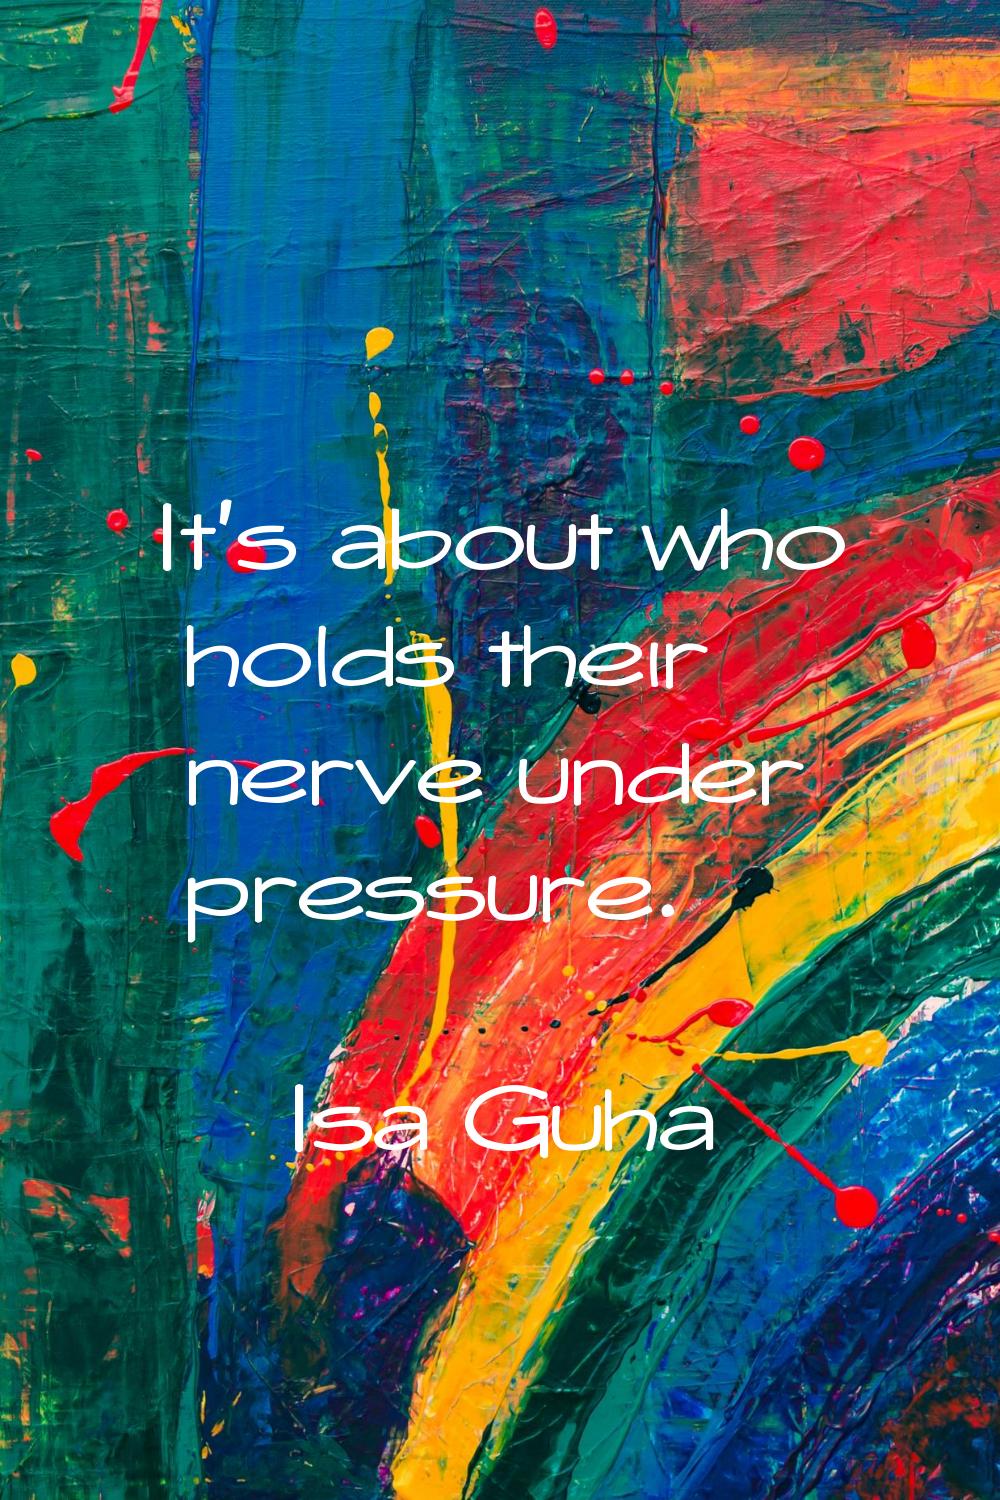 It's about who holds their nerve under pressure.